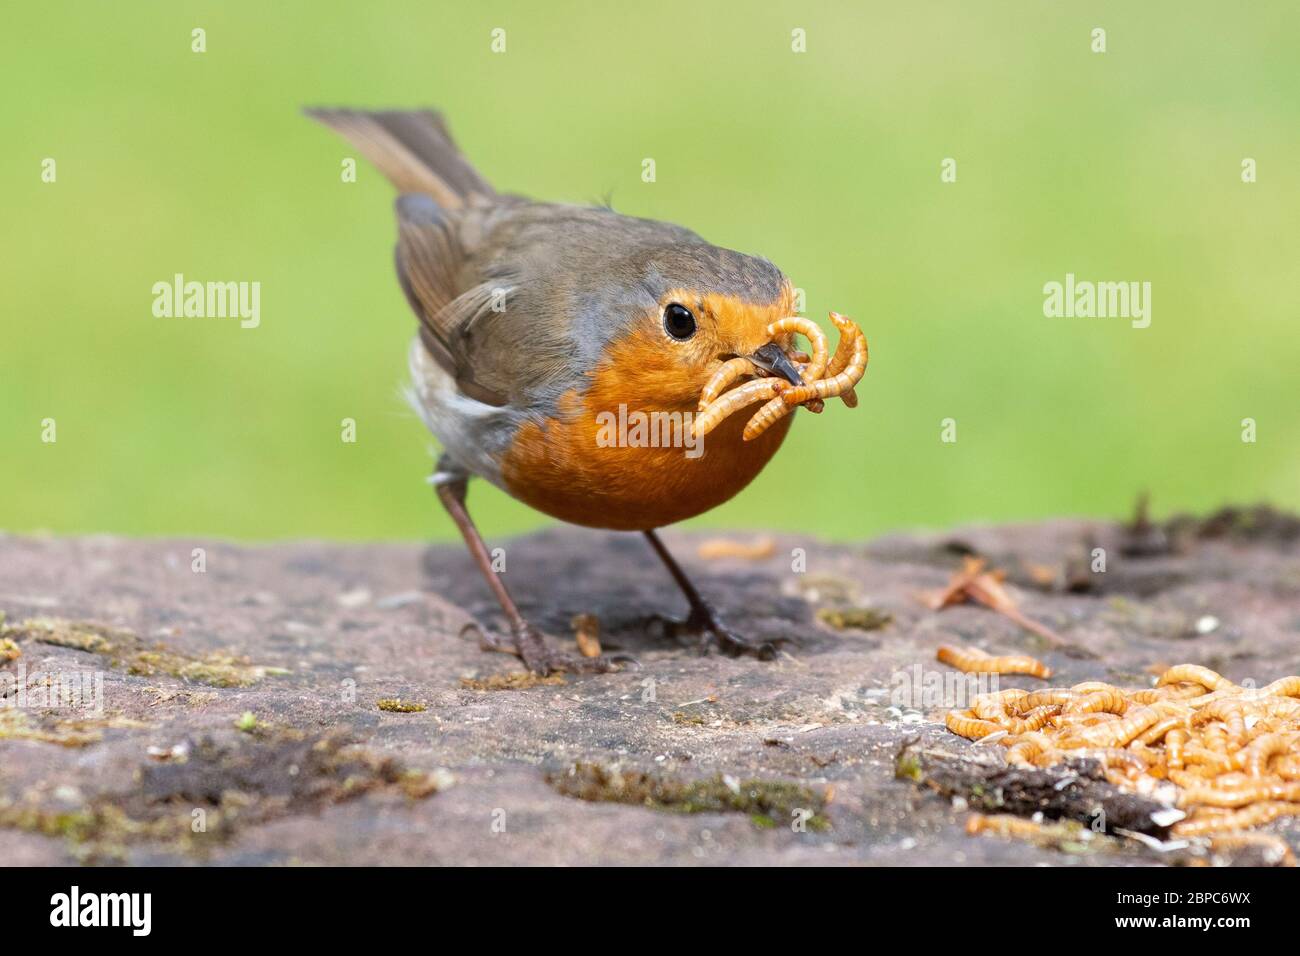 European Robin - erithacus rubecula - collecting mealworms to take to young in its nest - Scotland, UK Stock Photo